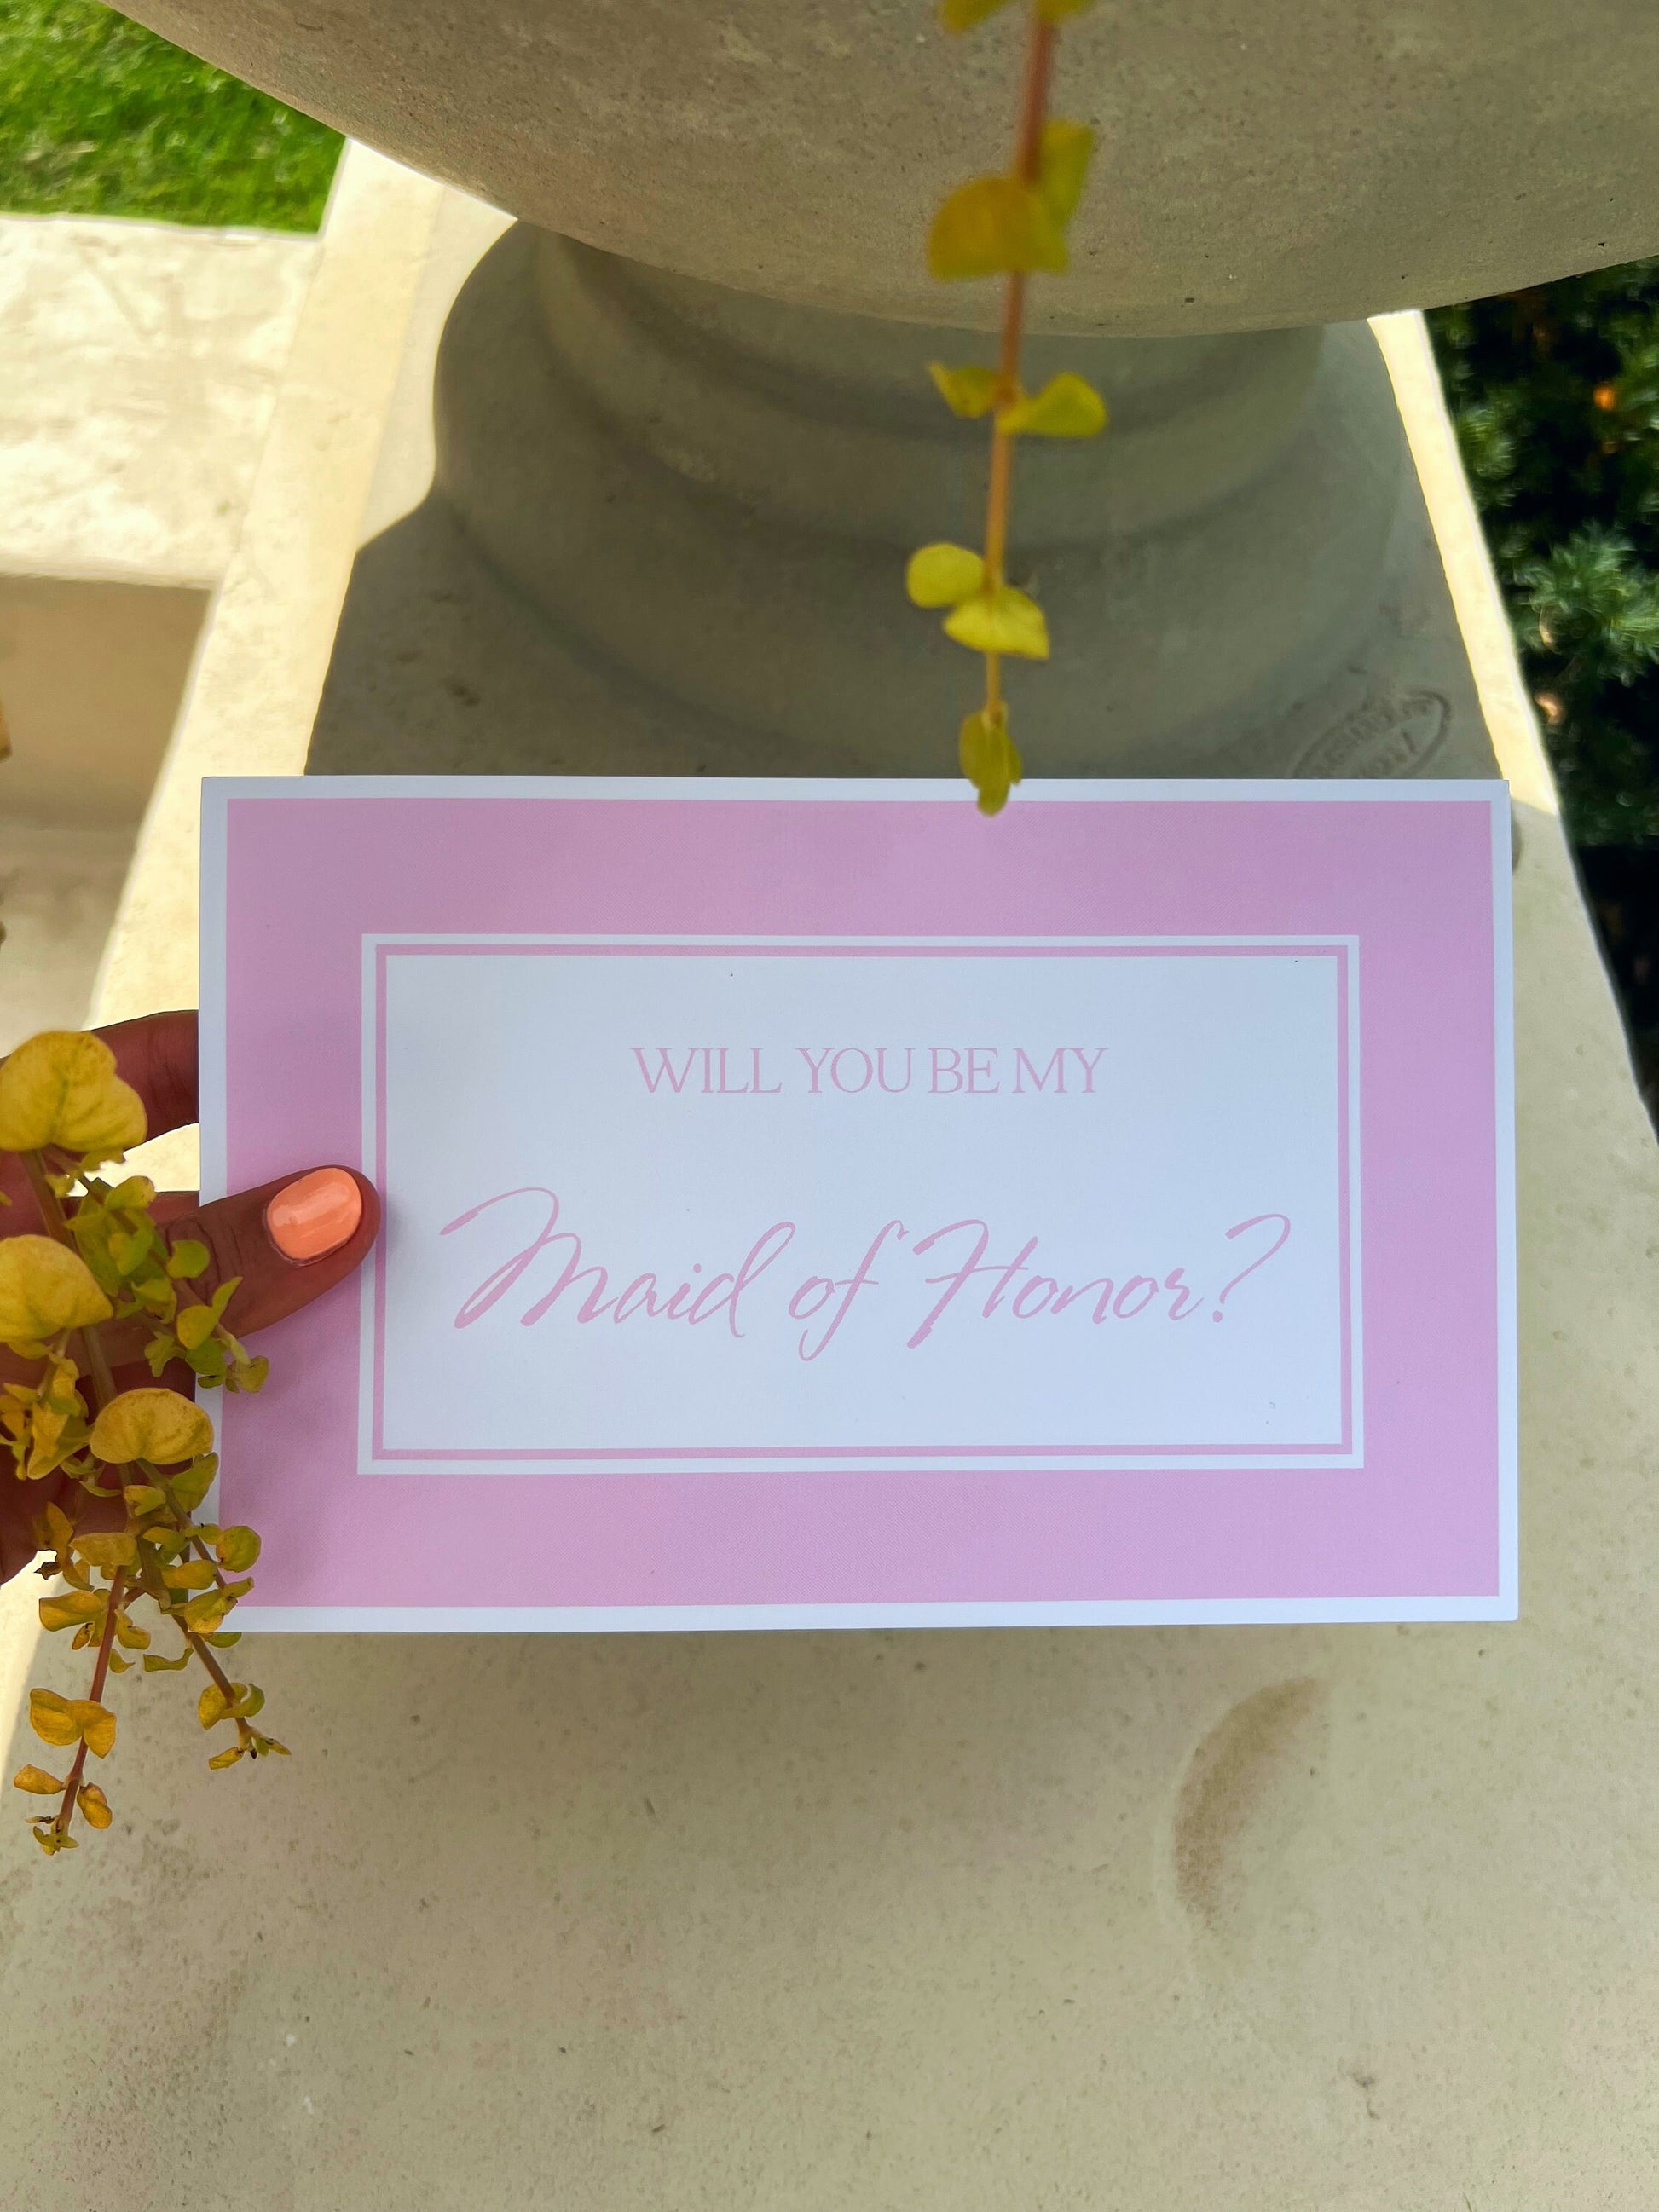 Bridesmaid Proposal Box Empty, Bridesmaid gift box, magnetic personalized gift box custom, flower girl proposal, maid of honor proposal